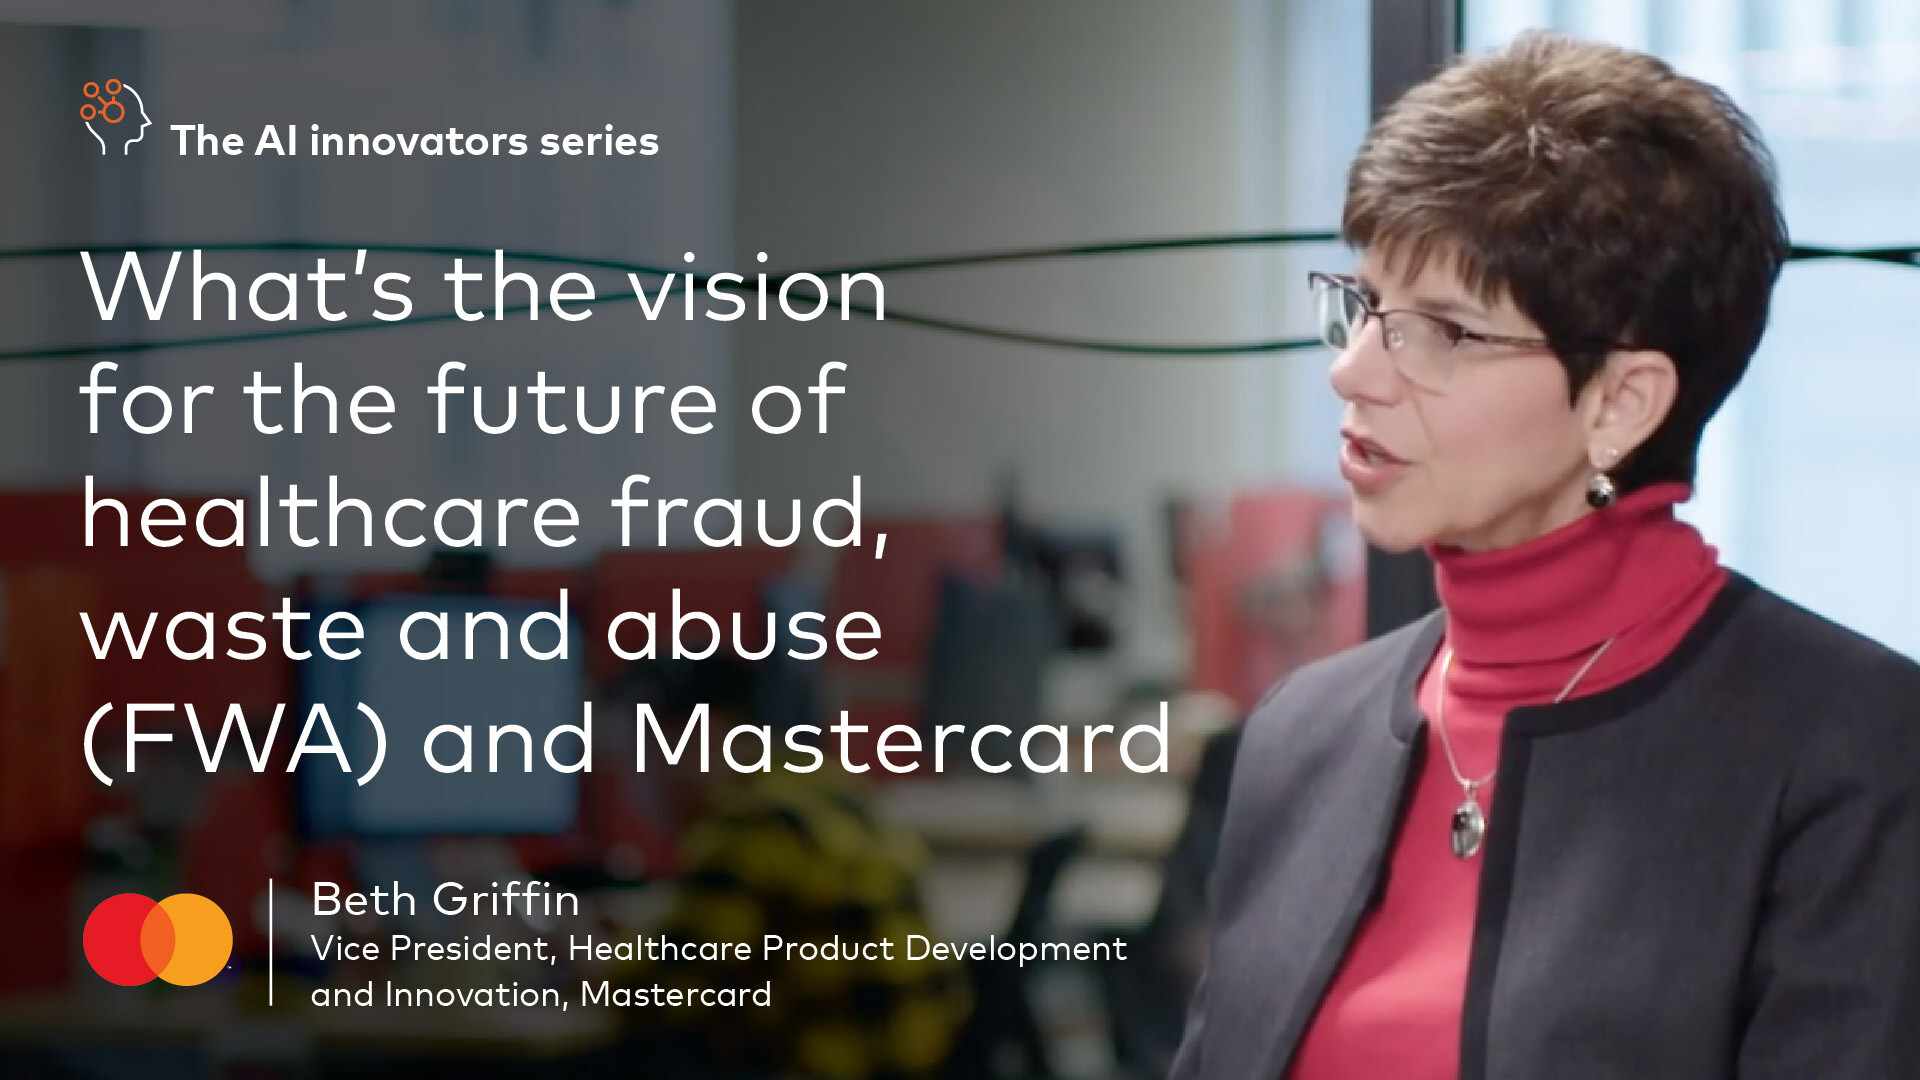 What’s the vision for the future of healthcare fraud, waste and abuse (FWA) and Mastercard